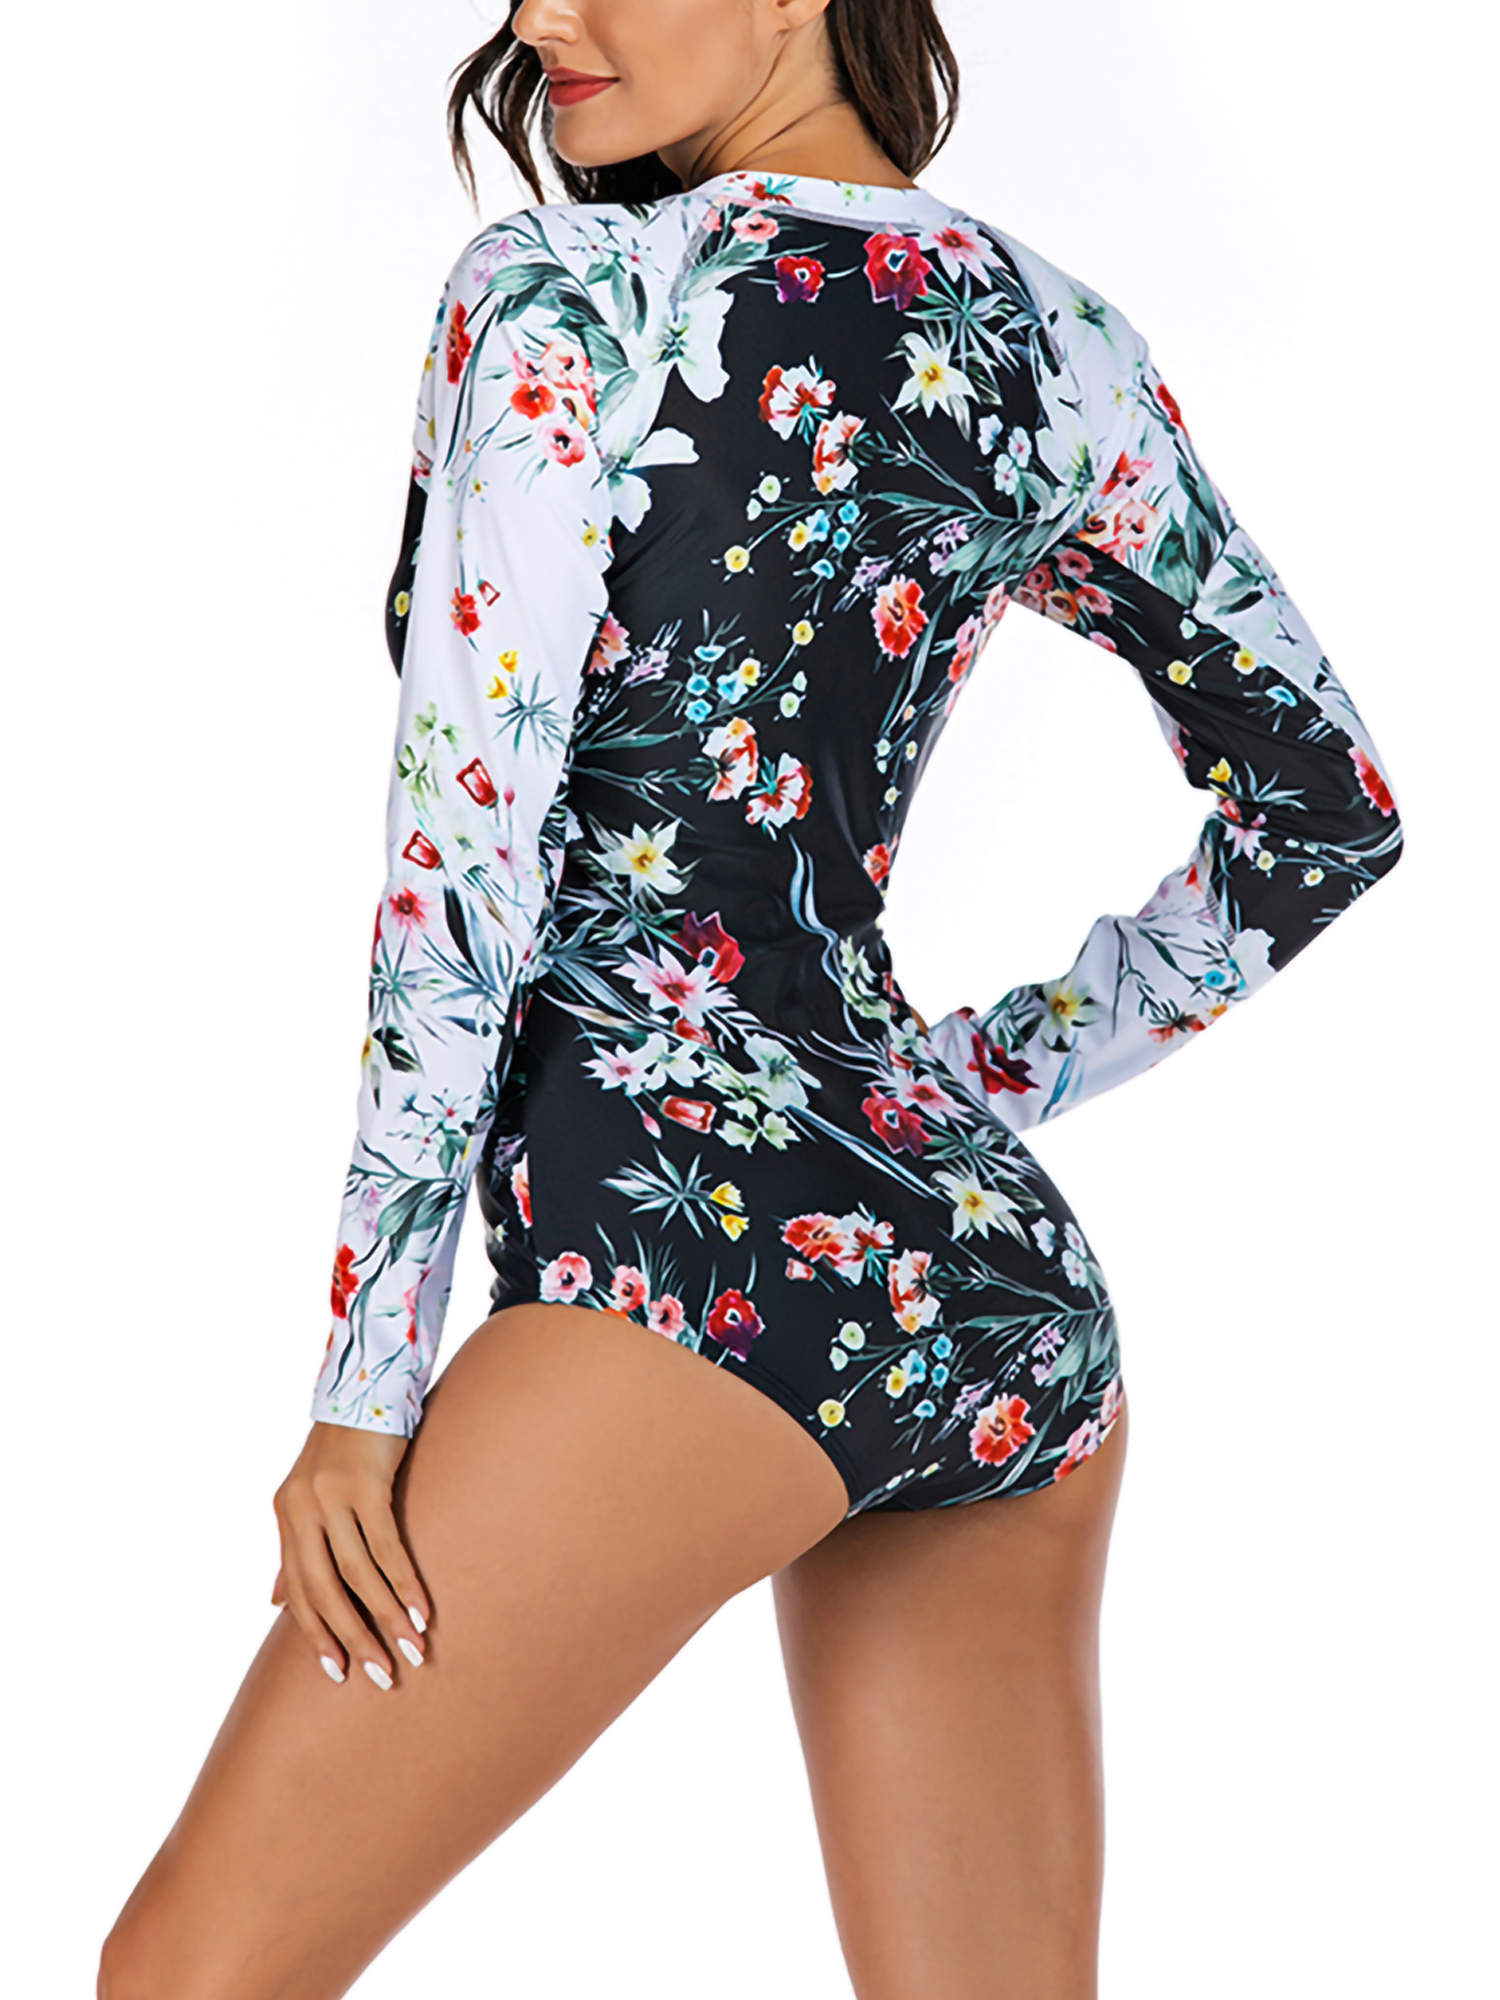 Sexy Dance Women's One Piece Swimsuit Long Sleeve Zip Floral Print Swimwear Bathing Suits for Surfing,Diving,Swimming,Rashguard - image 5 of 8